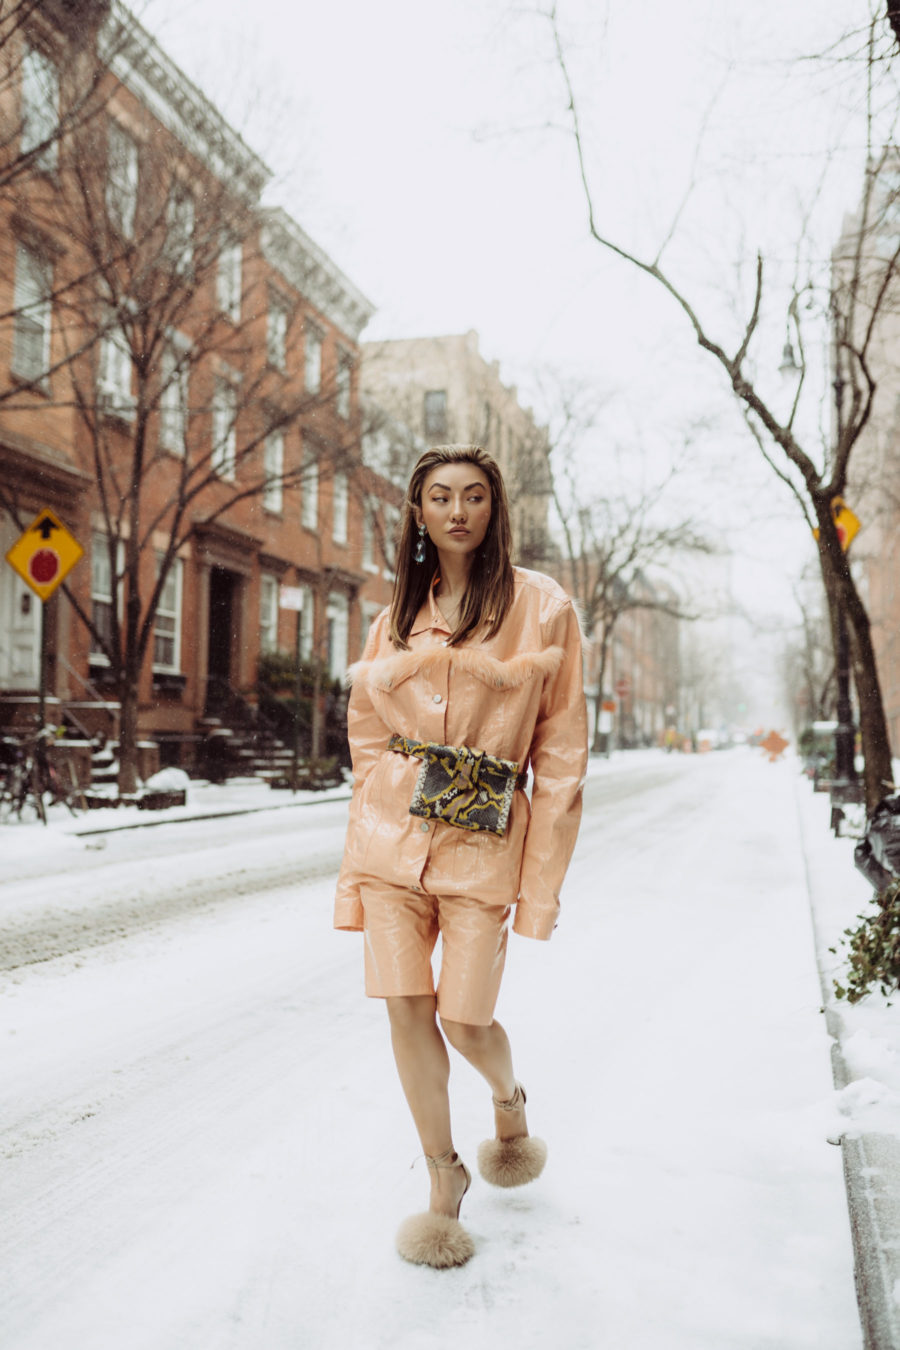 nyfw street style, nyfw spring 2019 street style, sally lapointe patent leather suit, brian atwood feather sandals // jessicawang.com